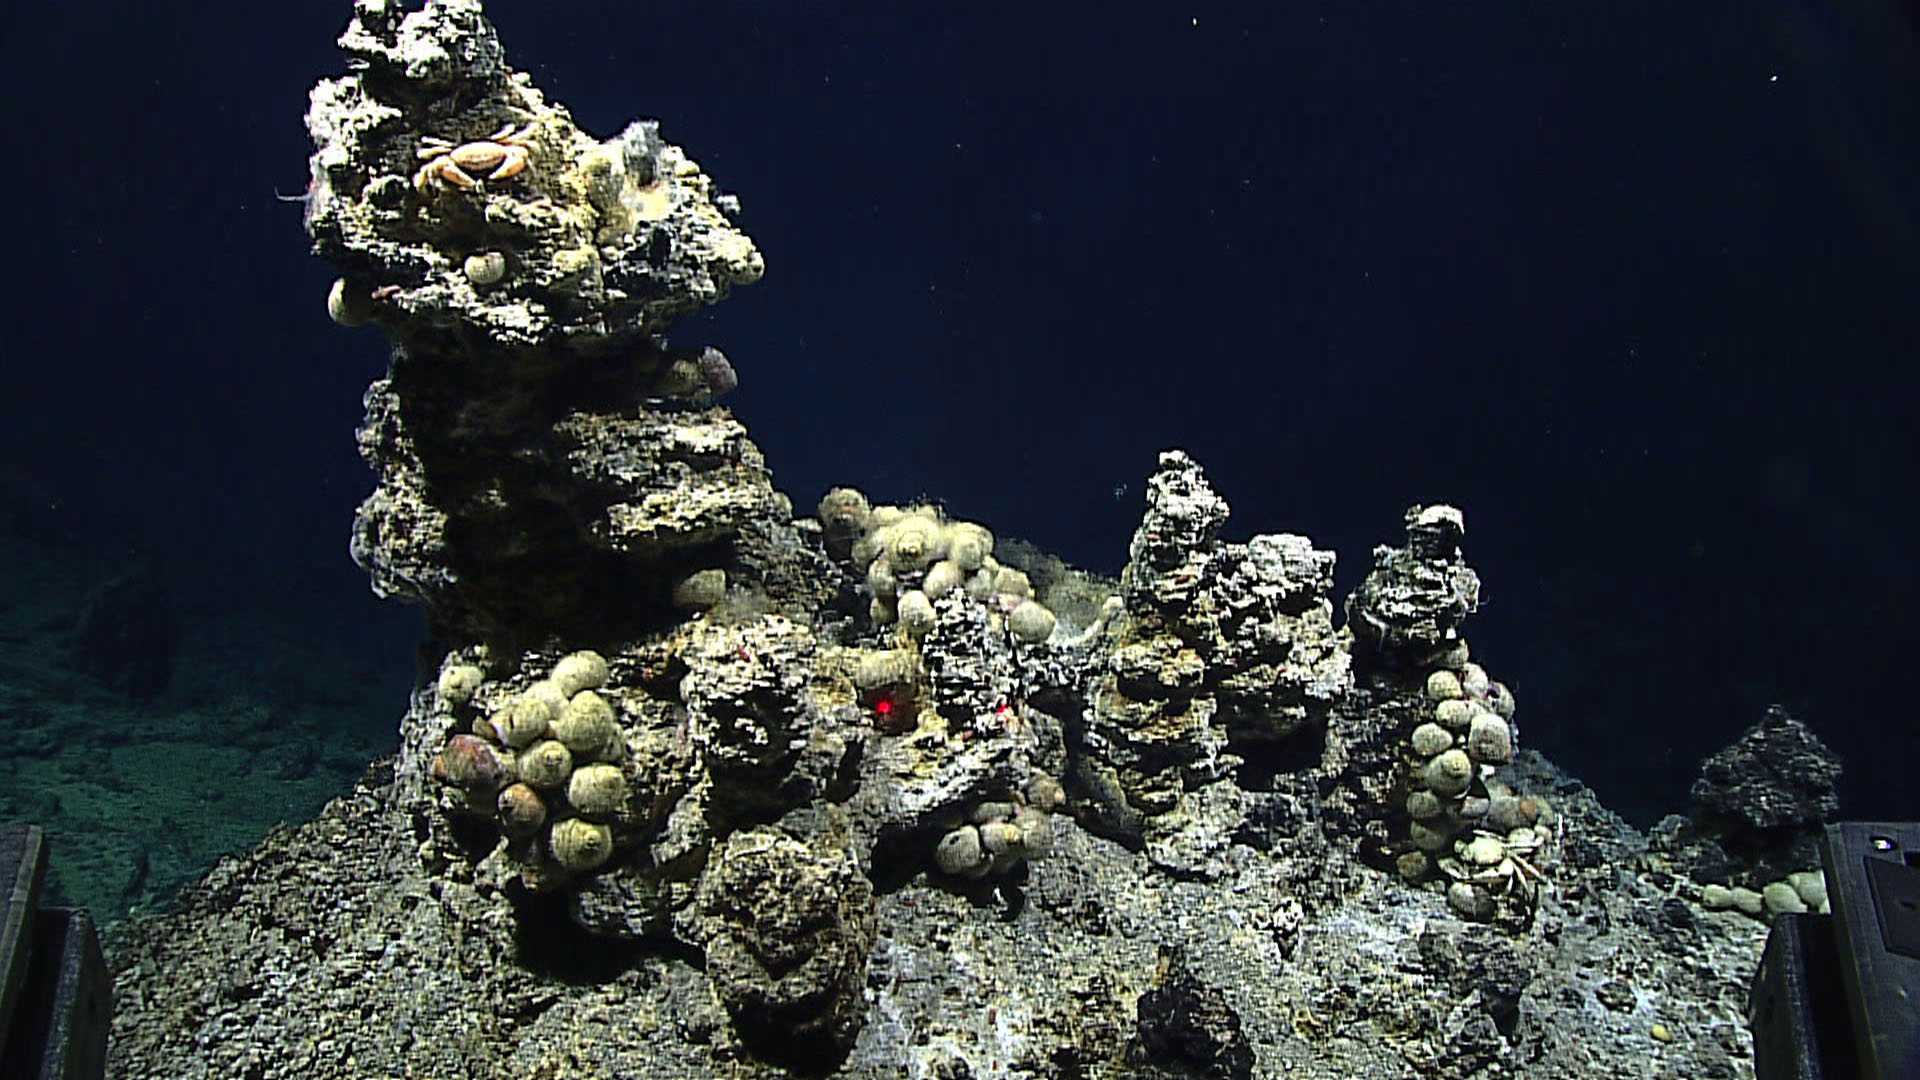 Student Investigation: Life on a Hydrothermal Vent